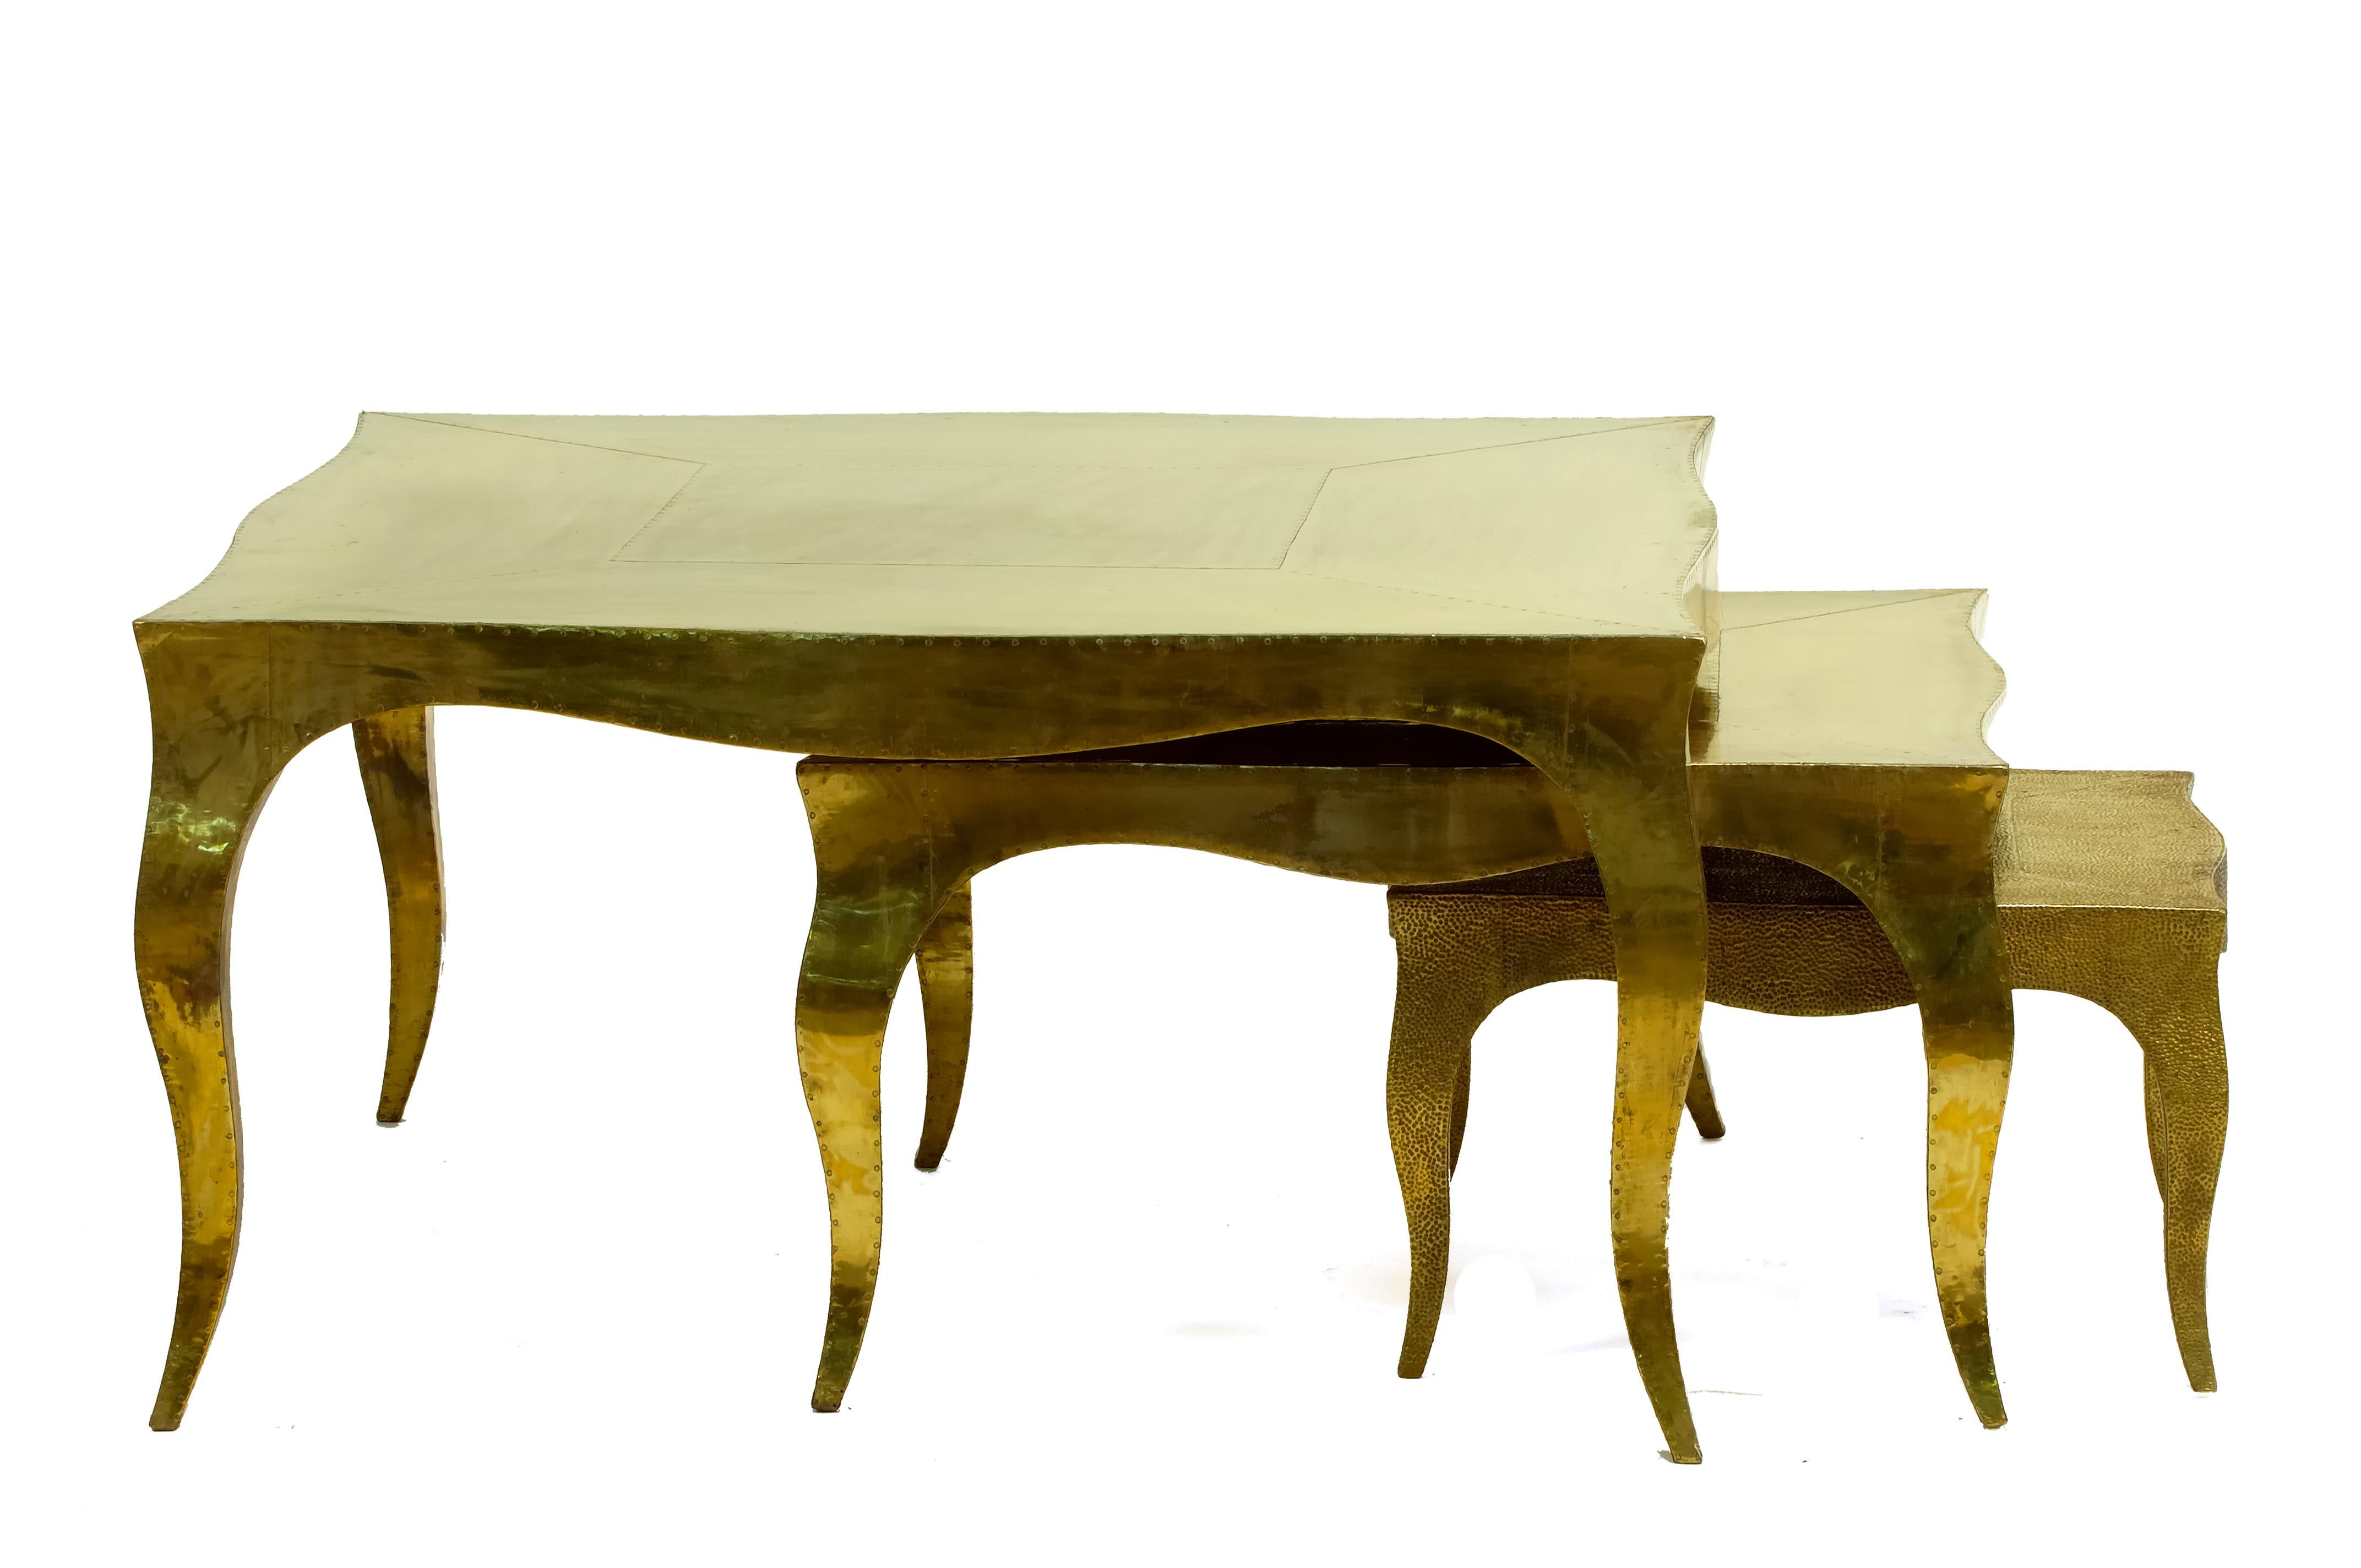 Louise Art Deco Industrial and Work Tables Mid. Hammered White Bronze by Paul Ma For Sale 9